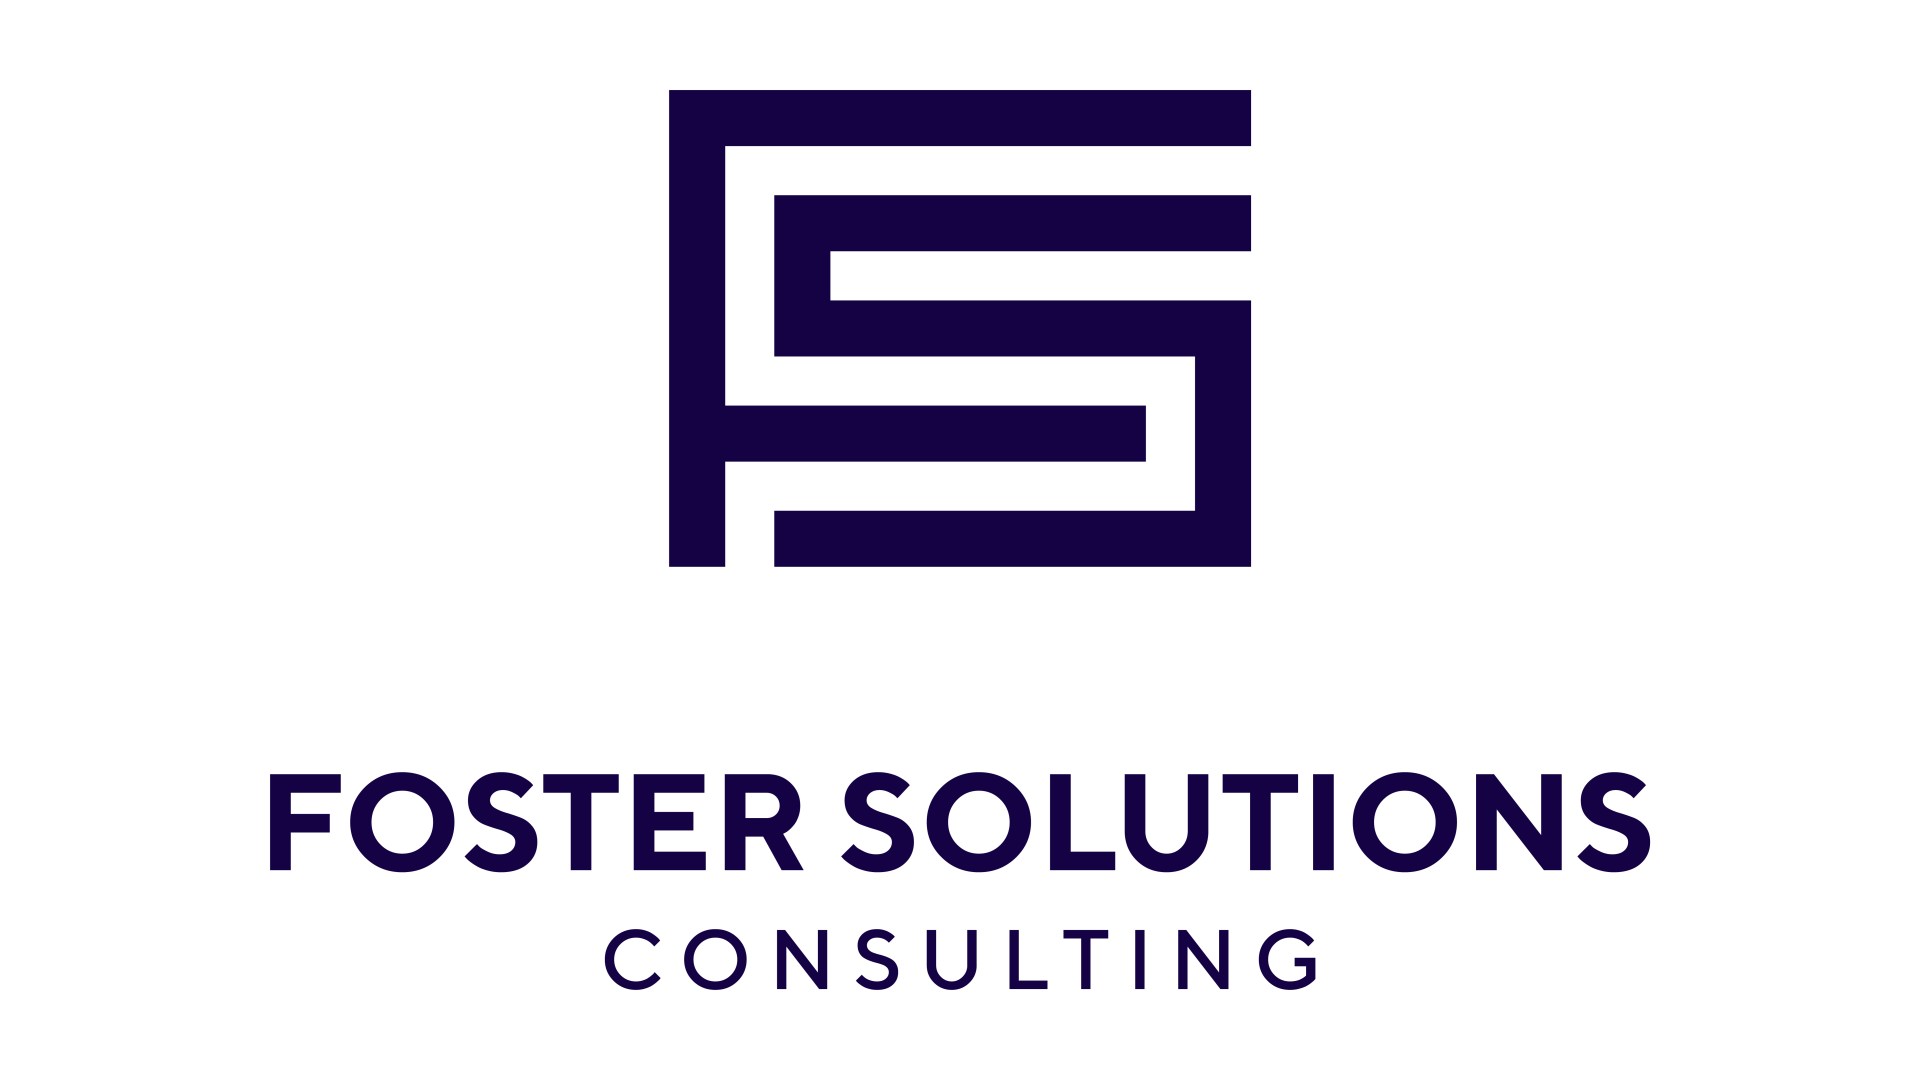 Foster Solutions Consulting